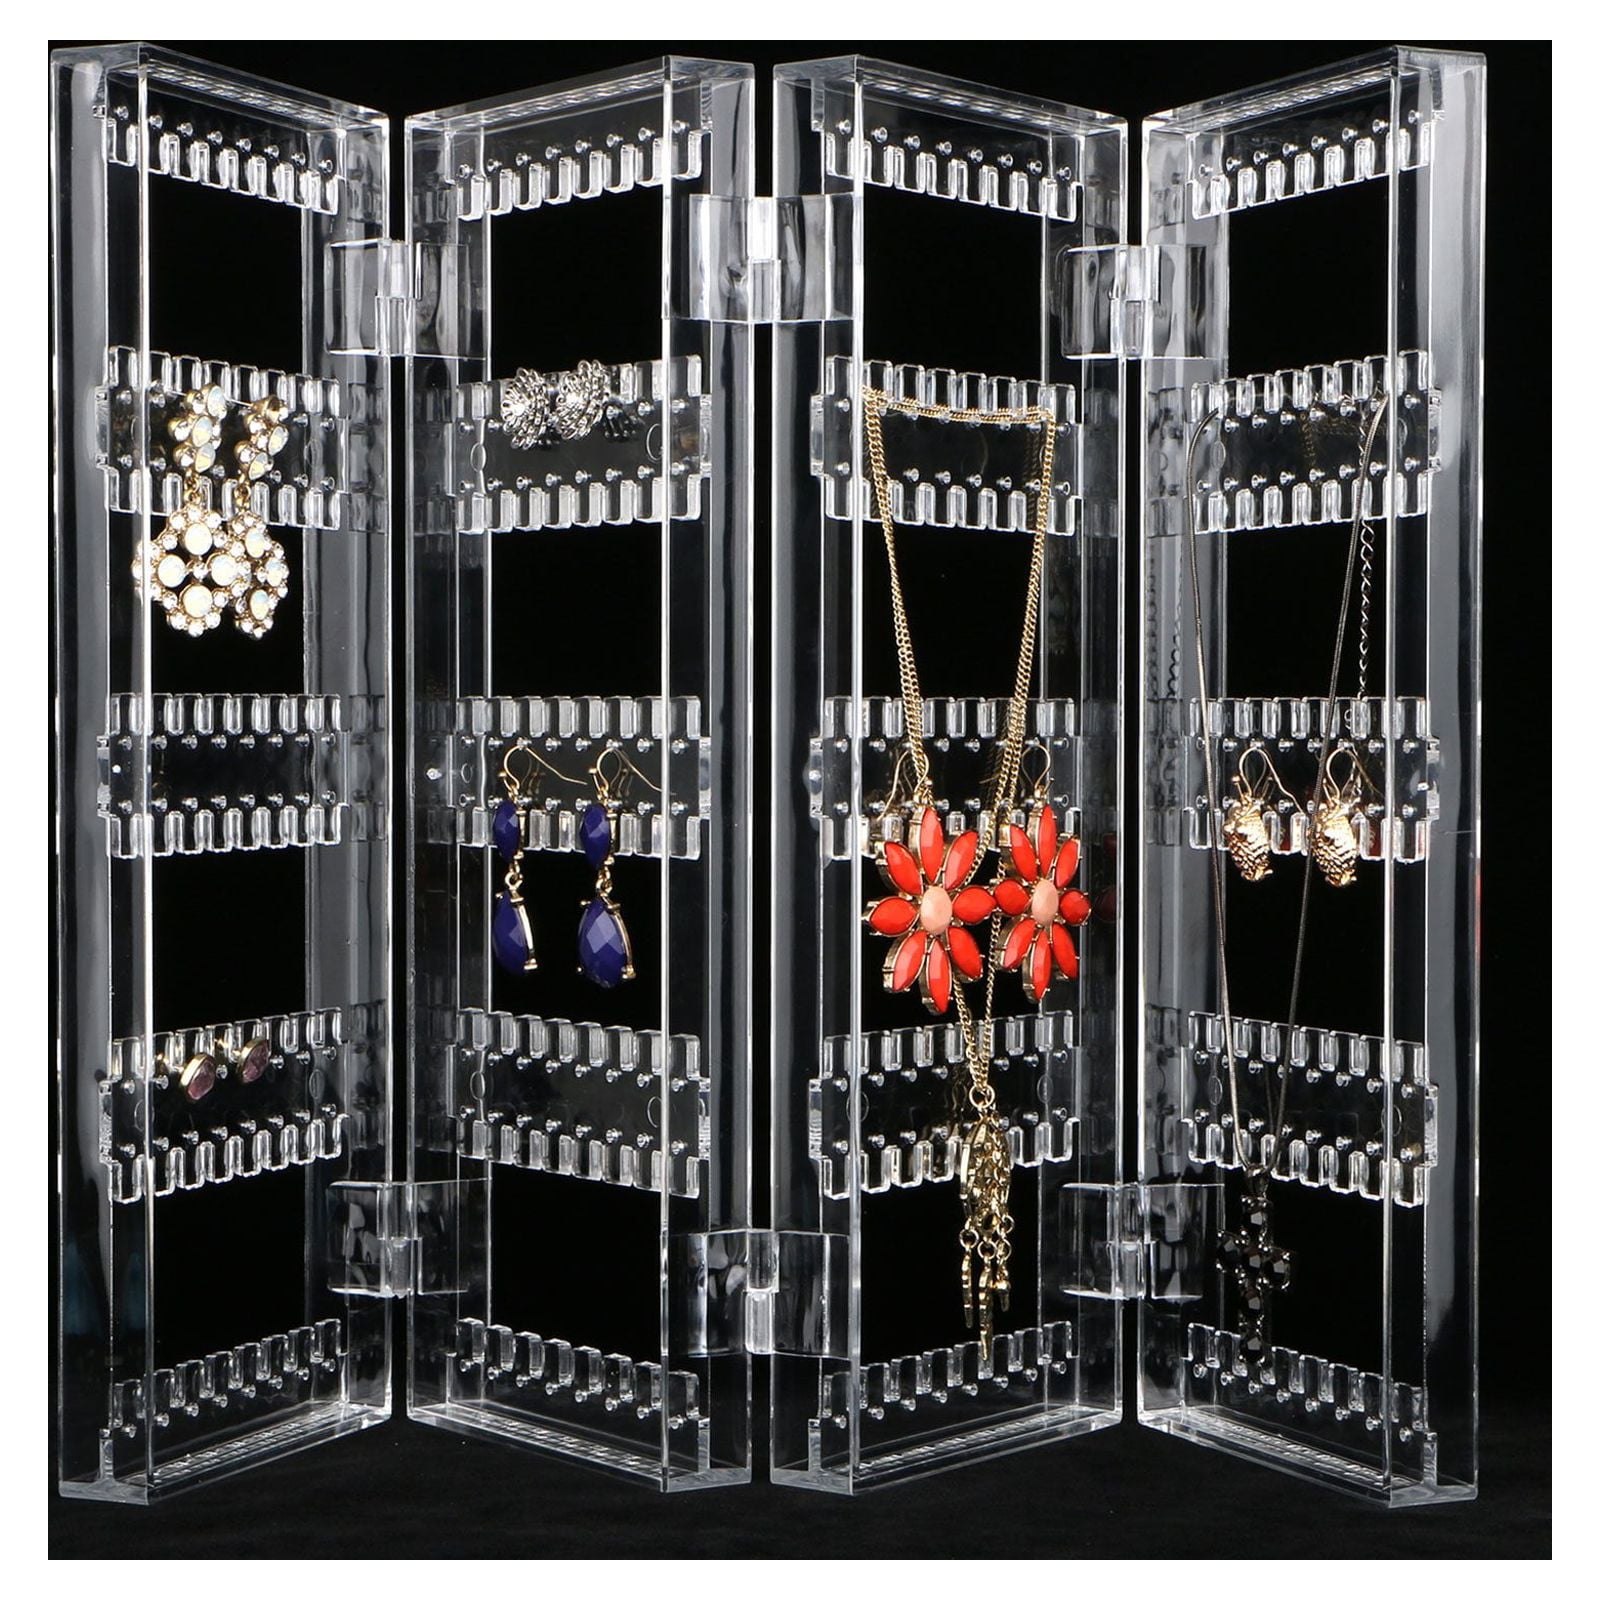 Wall Jewelry Organizer, Hanging Crystal-Clear Acrylic Jewelry Holder with  Shelf, Wall Mounted, to Display Necklaces, Earrings & Accessories - Pretty  Display: Making Your Space Beautiful!